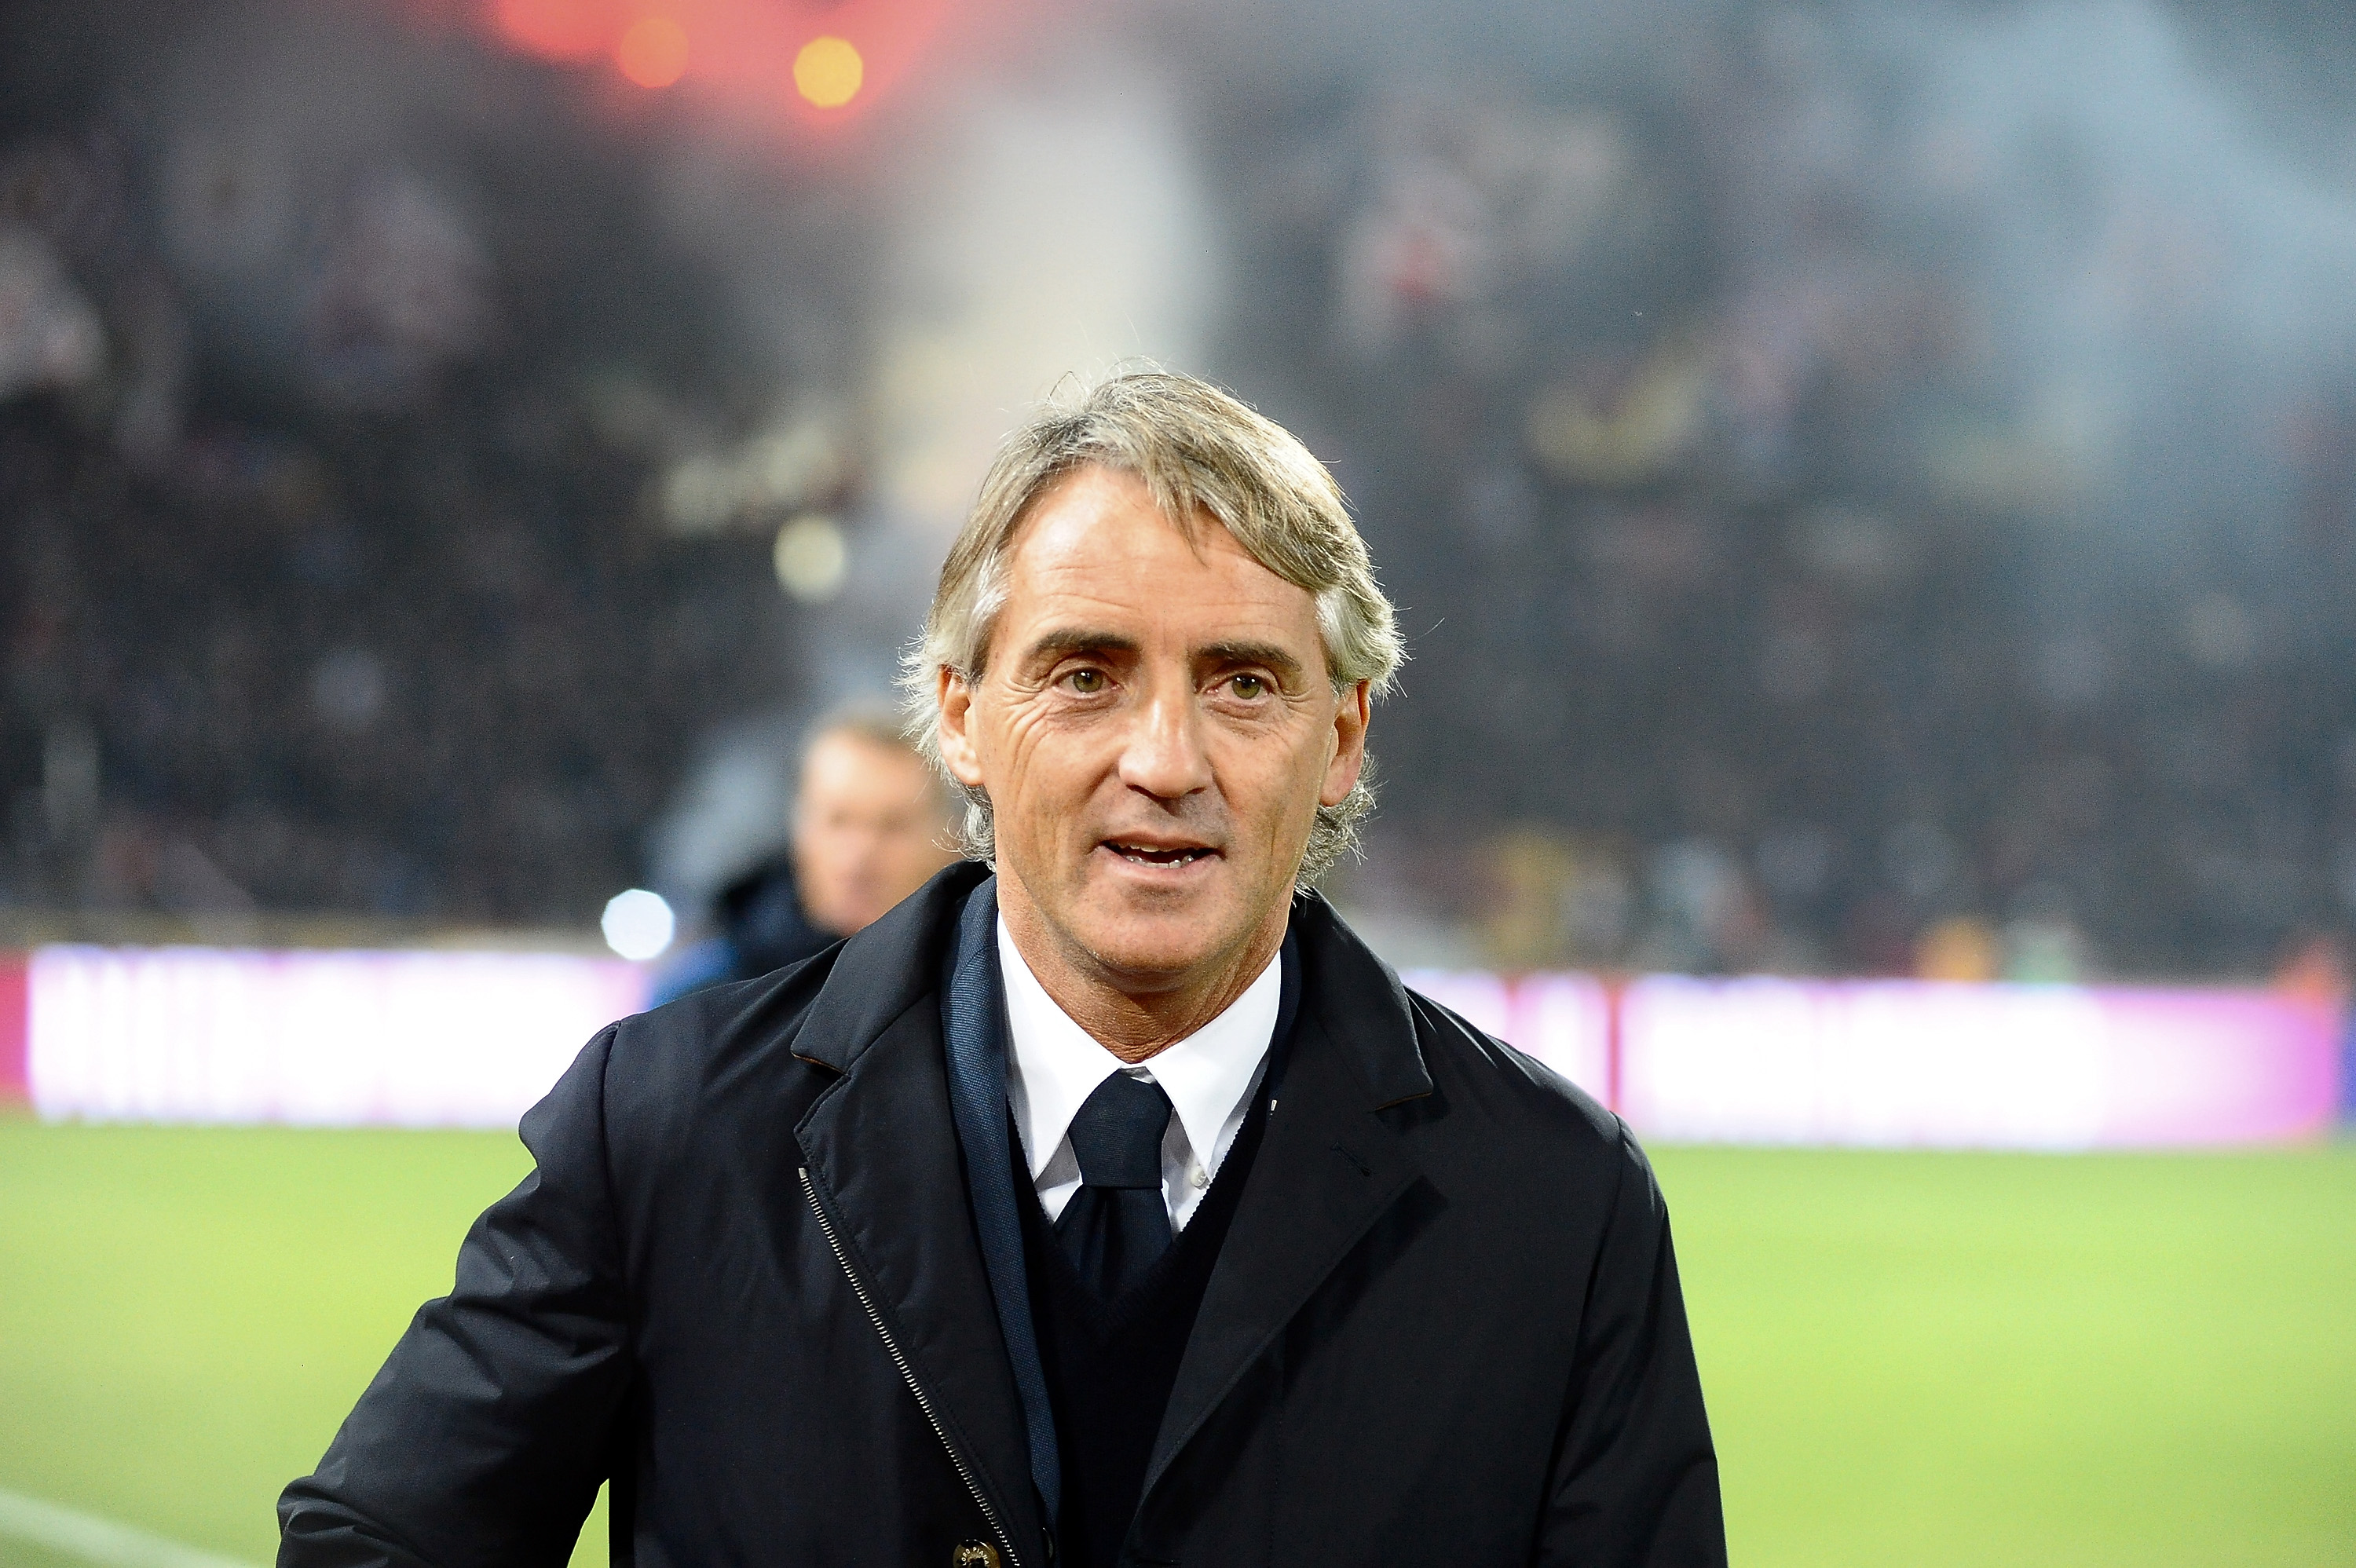 Mancini :” Very poor refereeing. I take responsibility, but…”